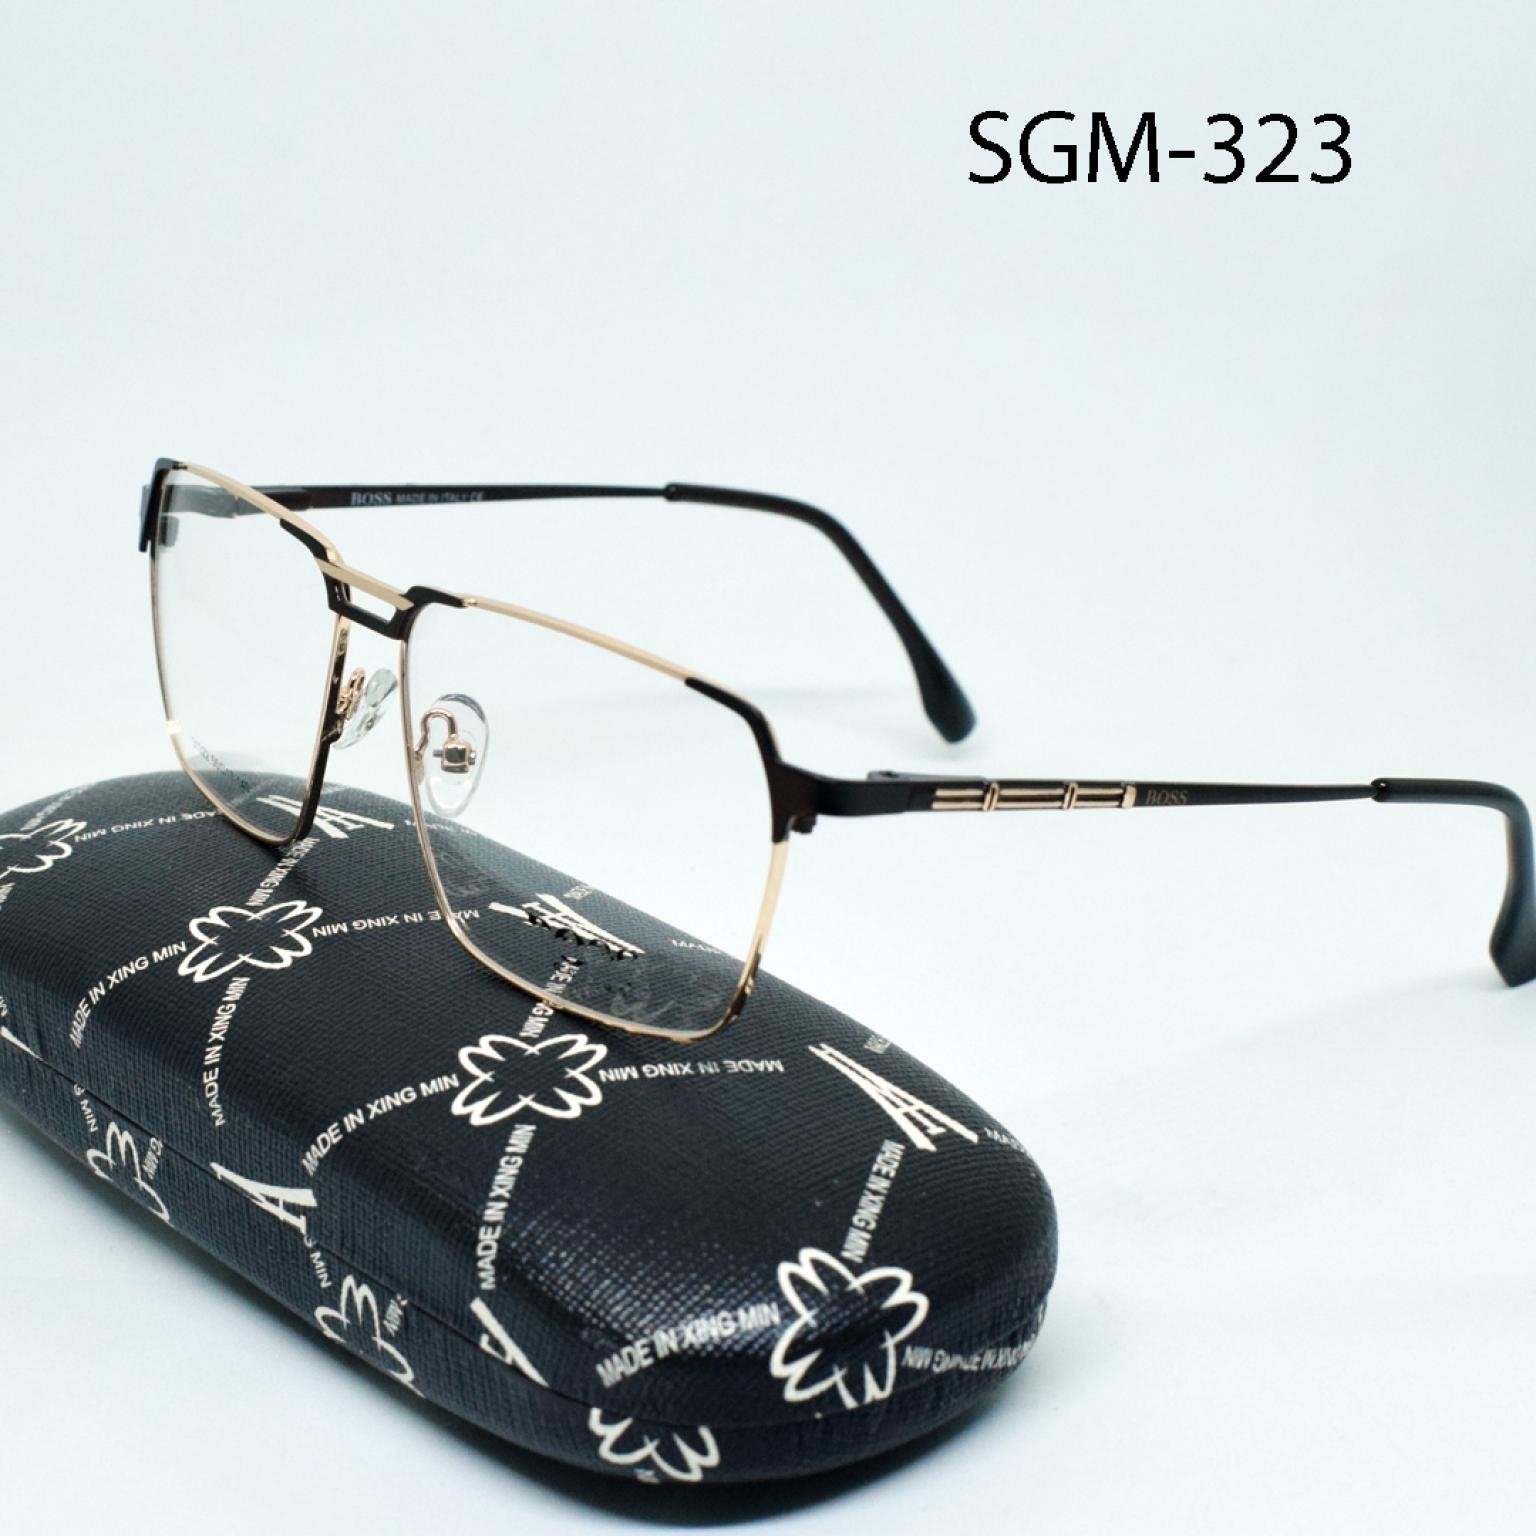 Metal Body Classic Design New Collection For New Year 2022 Optical Golden Frame Male Female Eye Care